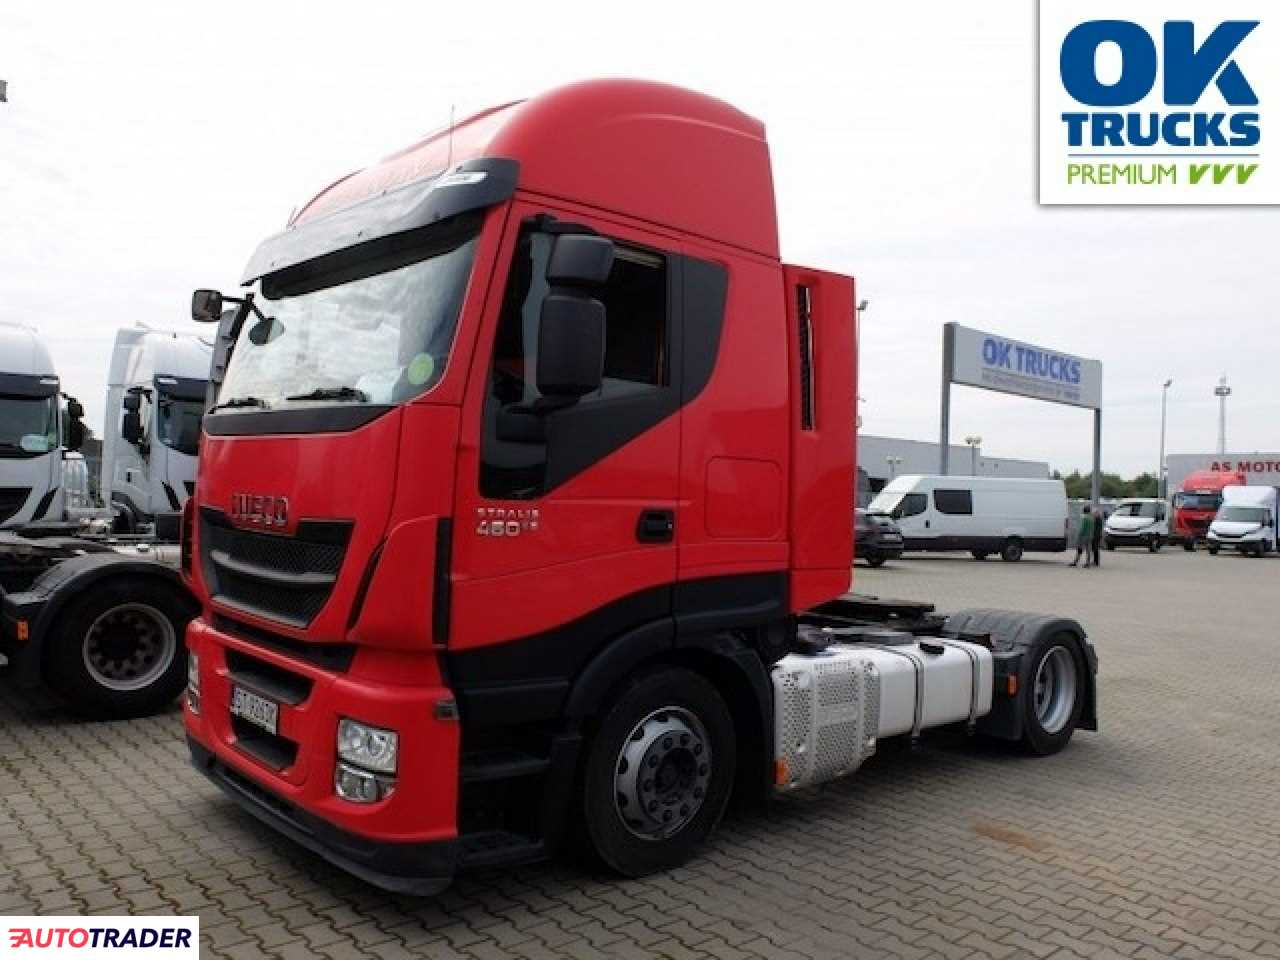 Iveco Stralis AS440S46T/FP LT